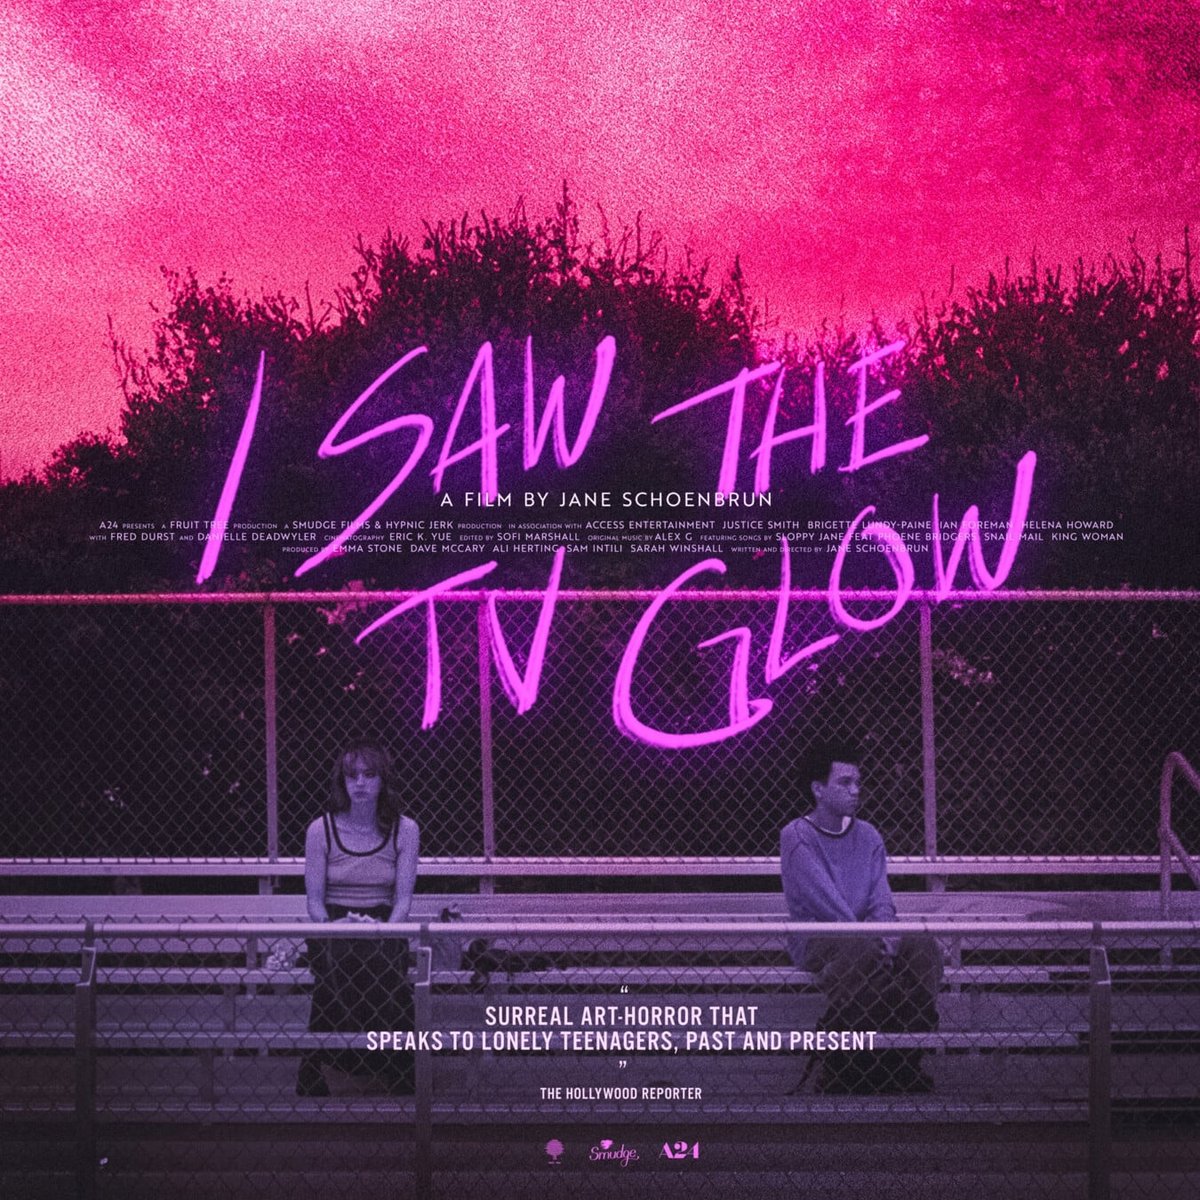 We are one week away from I SAW THE TV GLOW opening at the Hollywood. We’ll have multiple screenings every day starting Thursday, May 16, so secure your tickets today! hollywoodtheatre.org/events/i-saw-t…